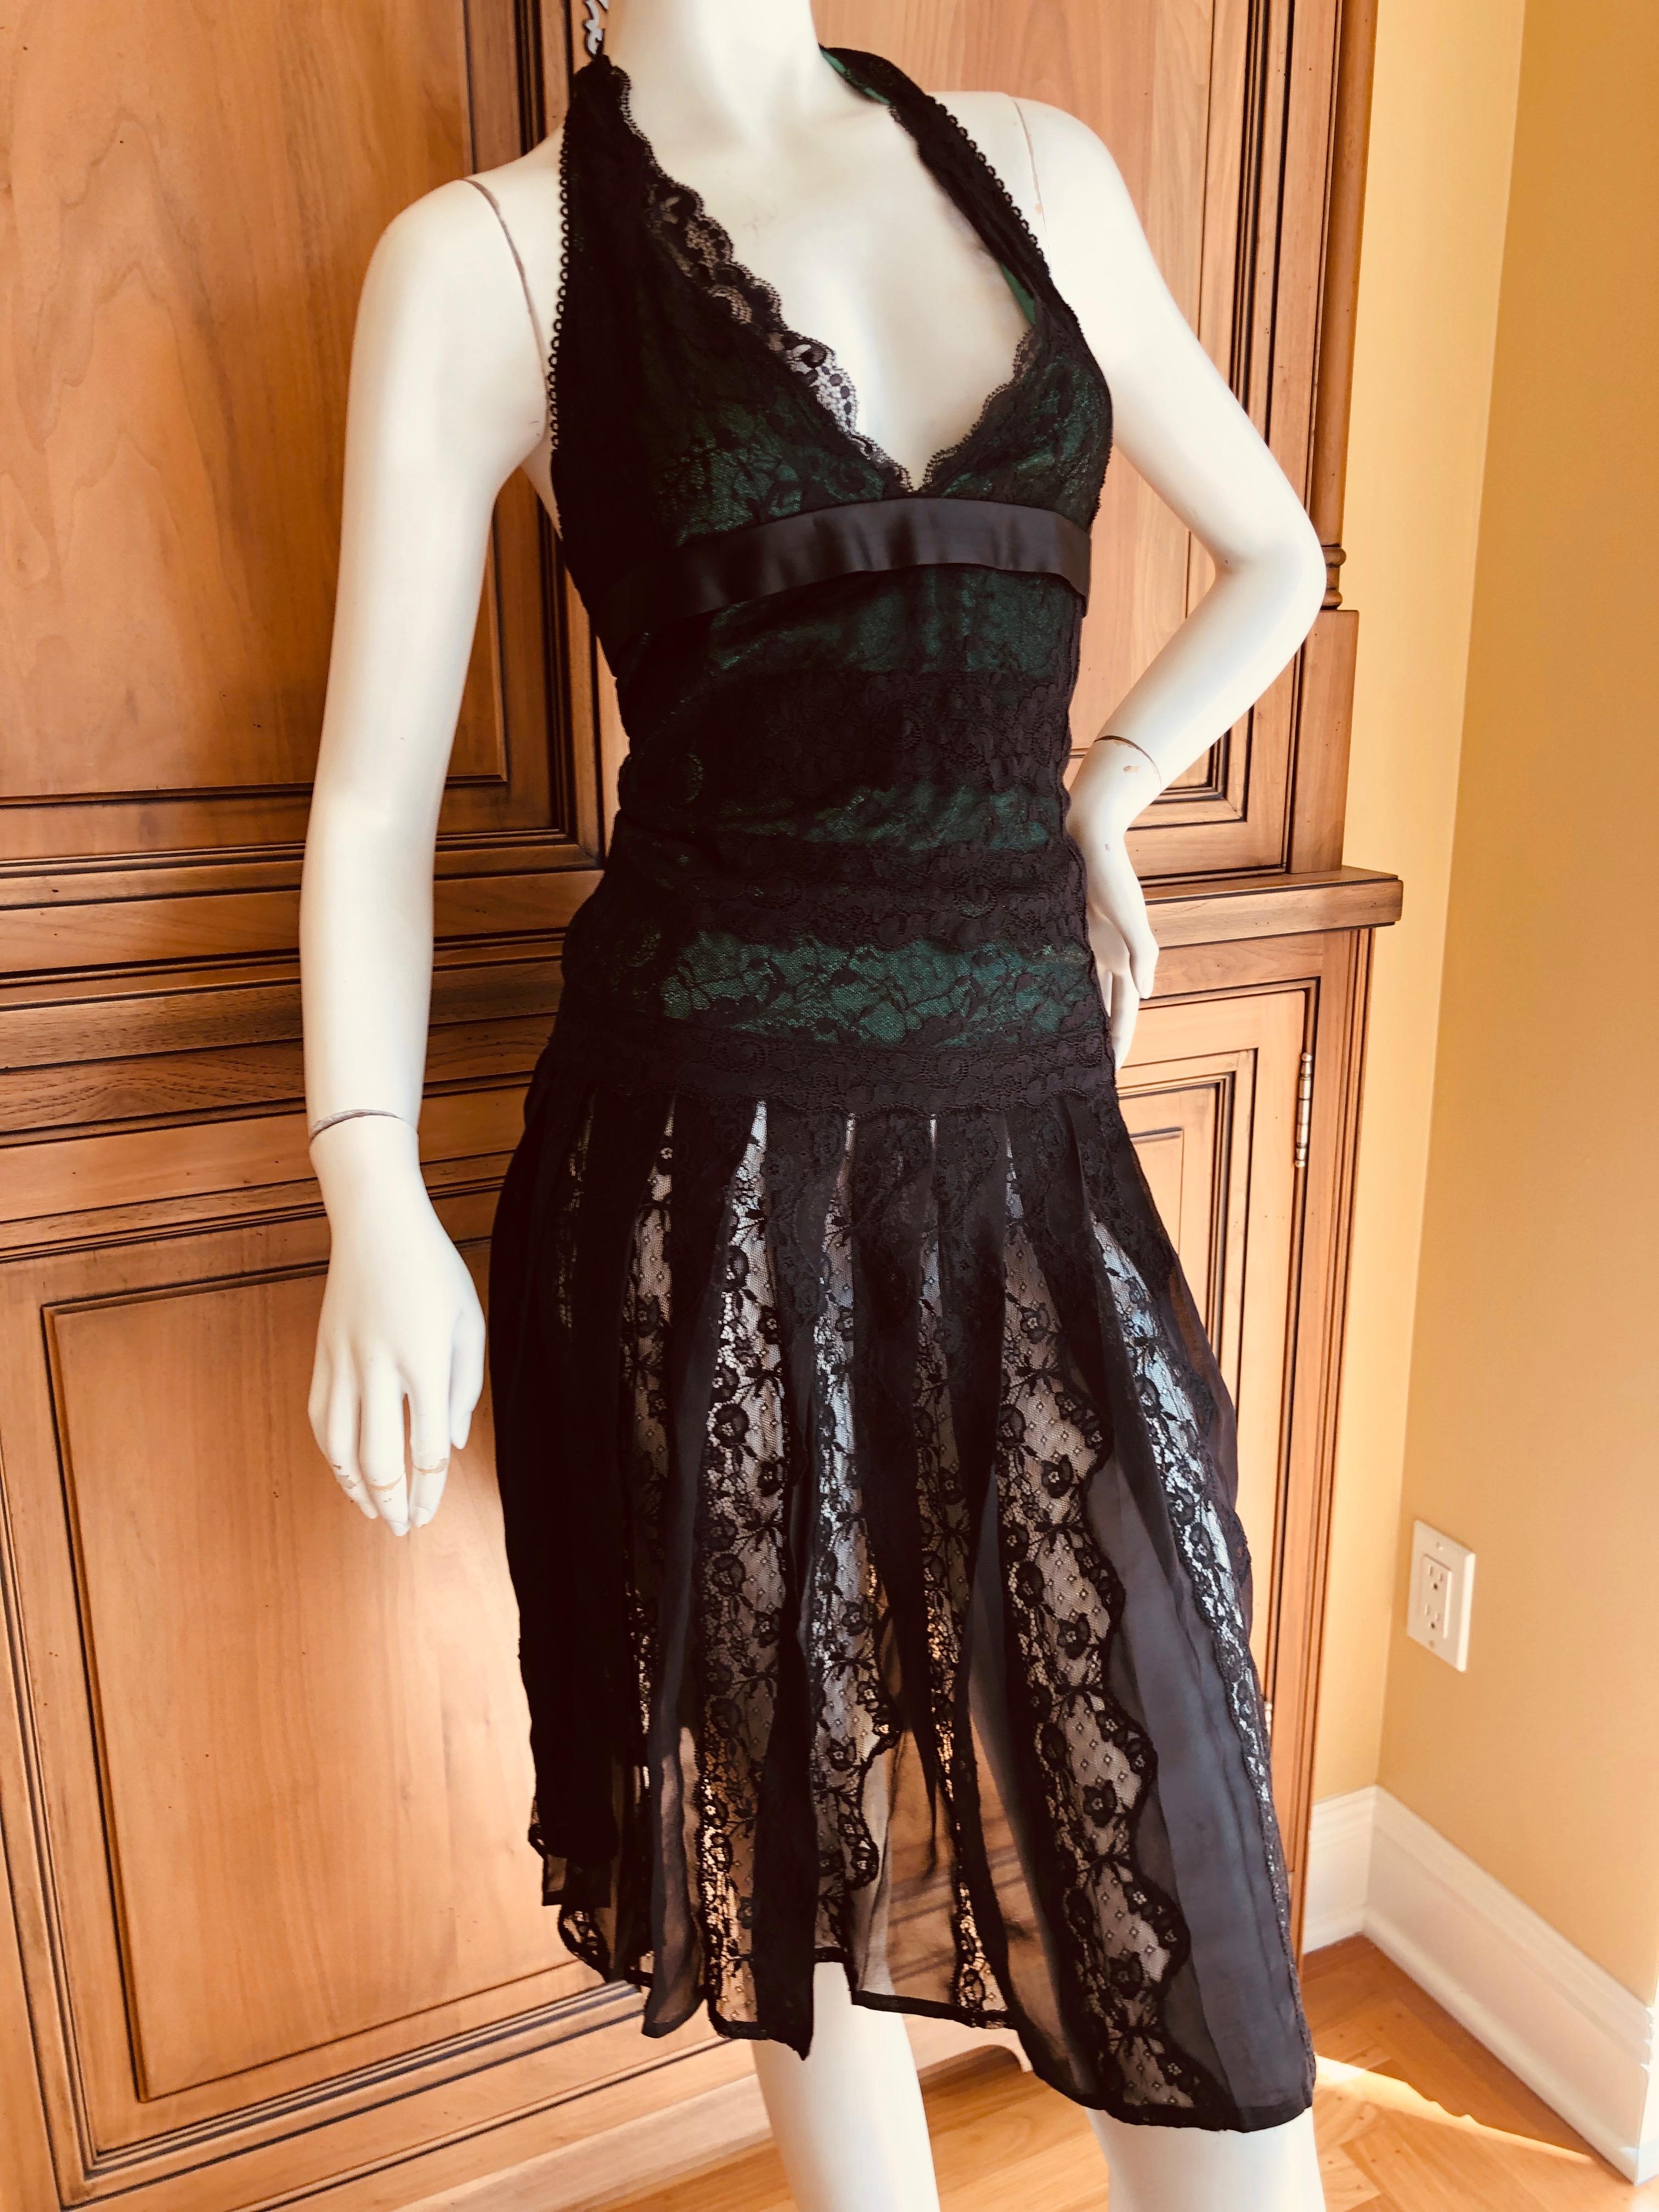 Dolce & Gabbana for D&G Vintage Sheer Black and Green Lace Cocktail Dress  For Sale 1